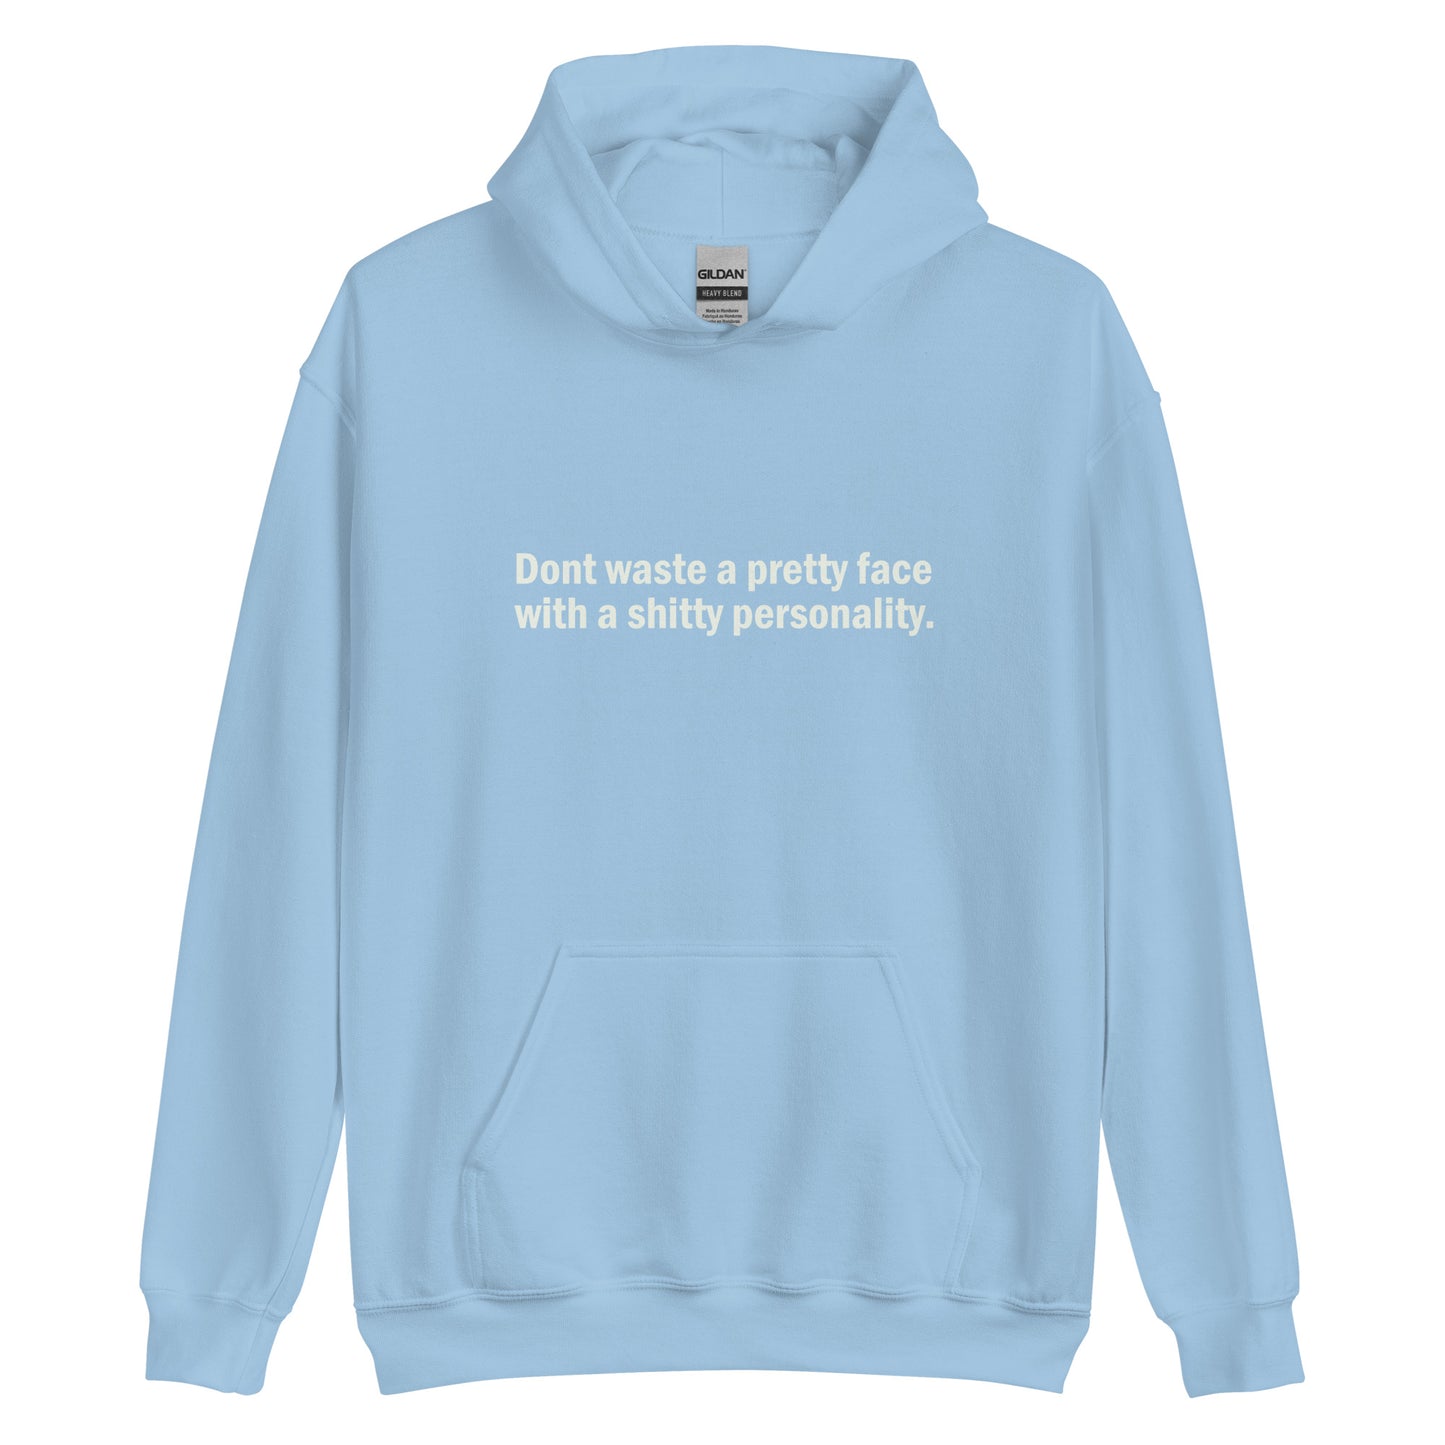 Don't waste a pretty face with a shitty personality hoodie